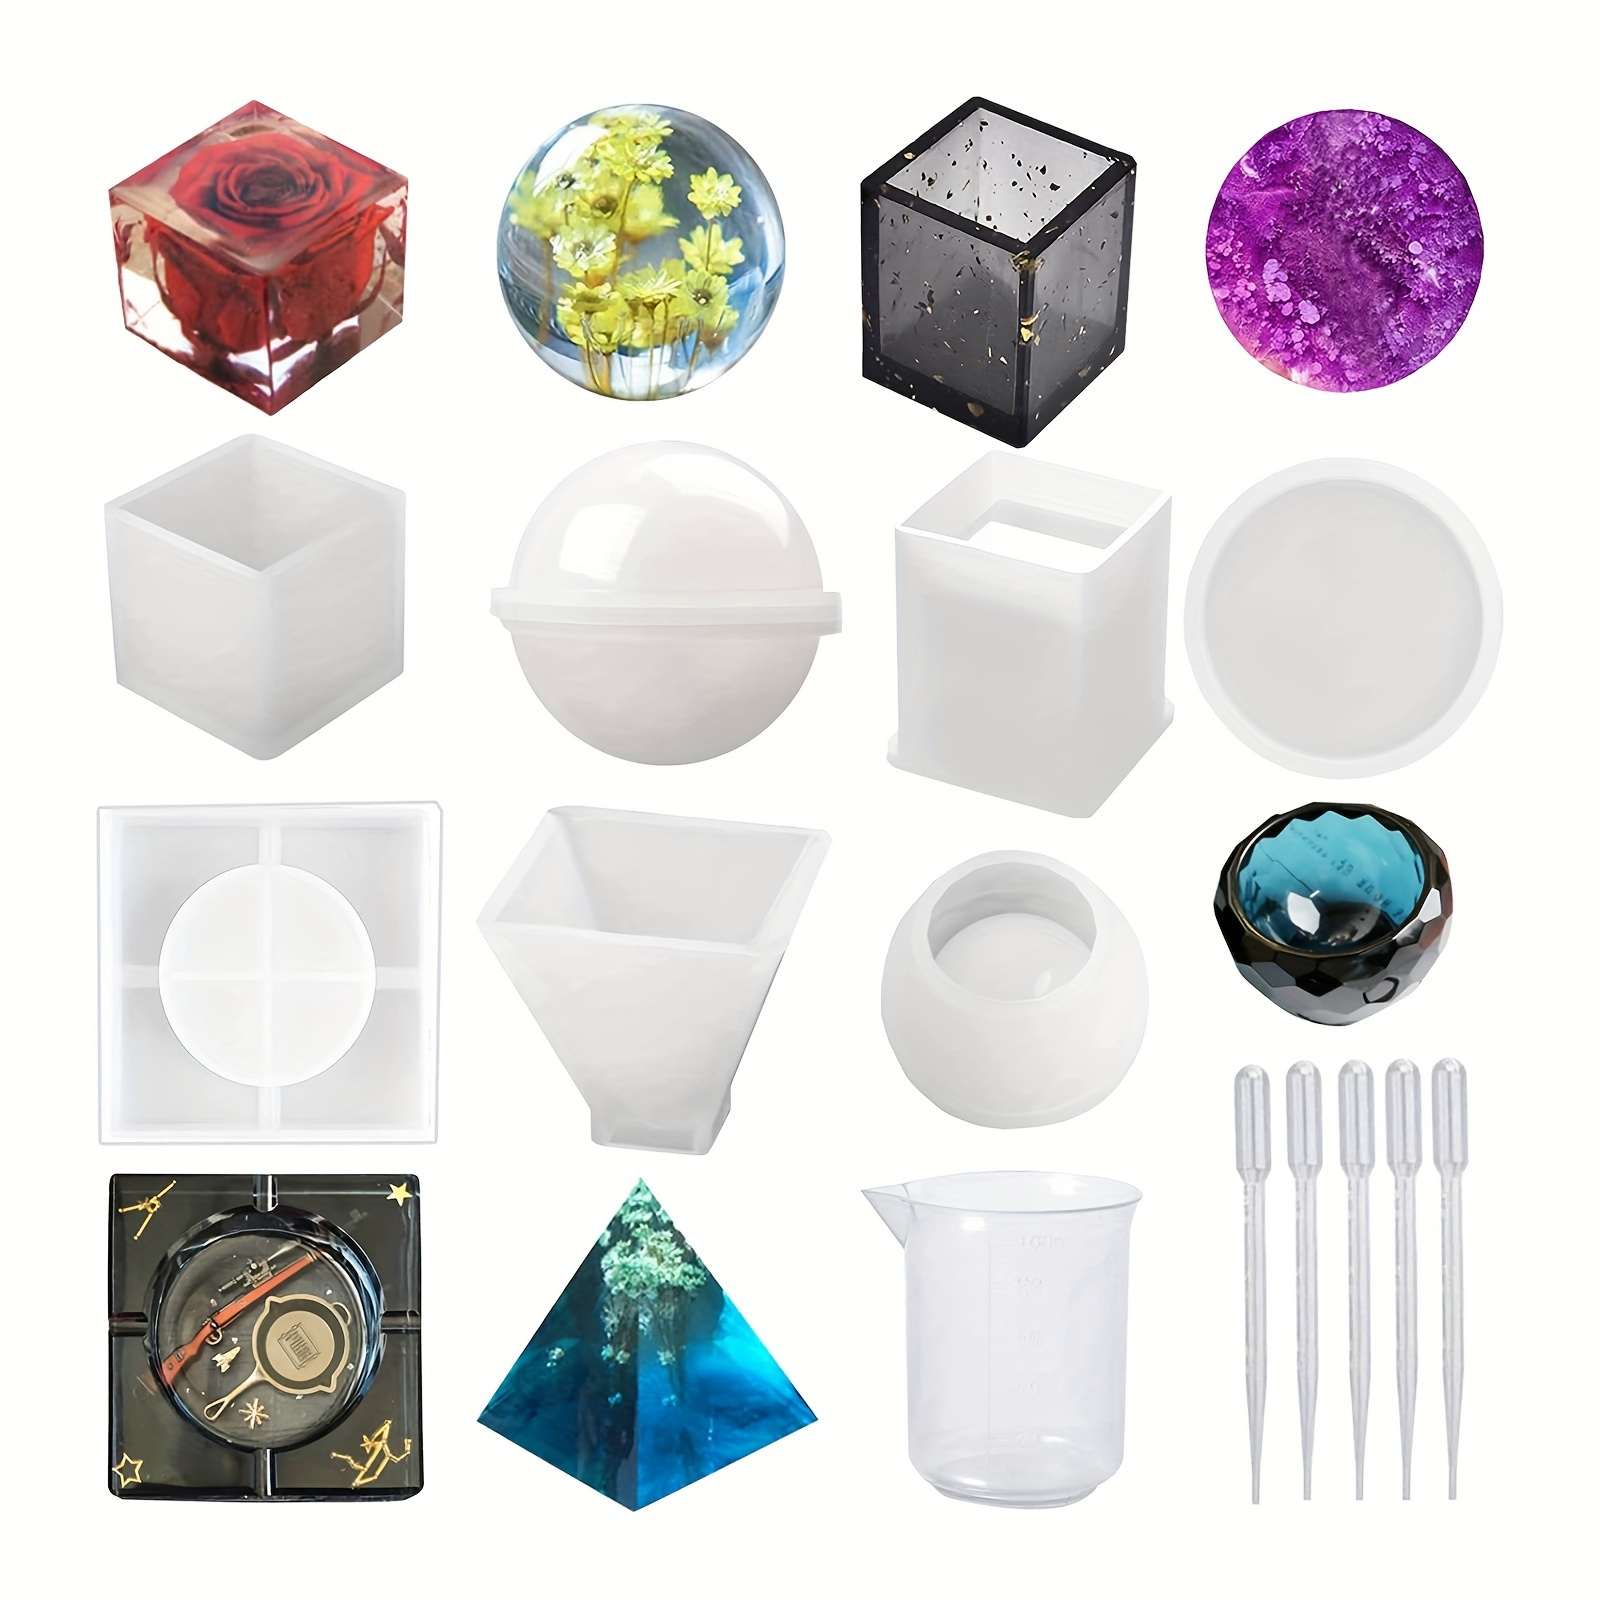 KISREL Resin Molds Silicone Kit 12PCS, Epoxy Resin Molds, Resin Mold  Including Cube, Pen Container, Pyramid, Ashtray, Tray, Love, Round, Square,  Ball